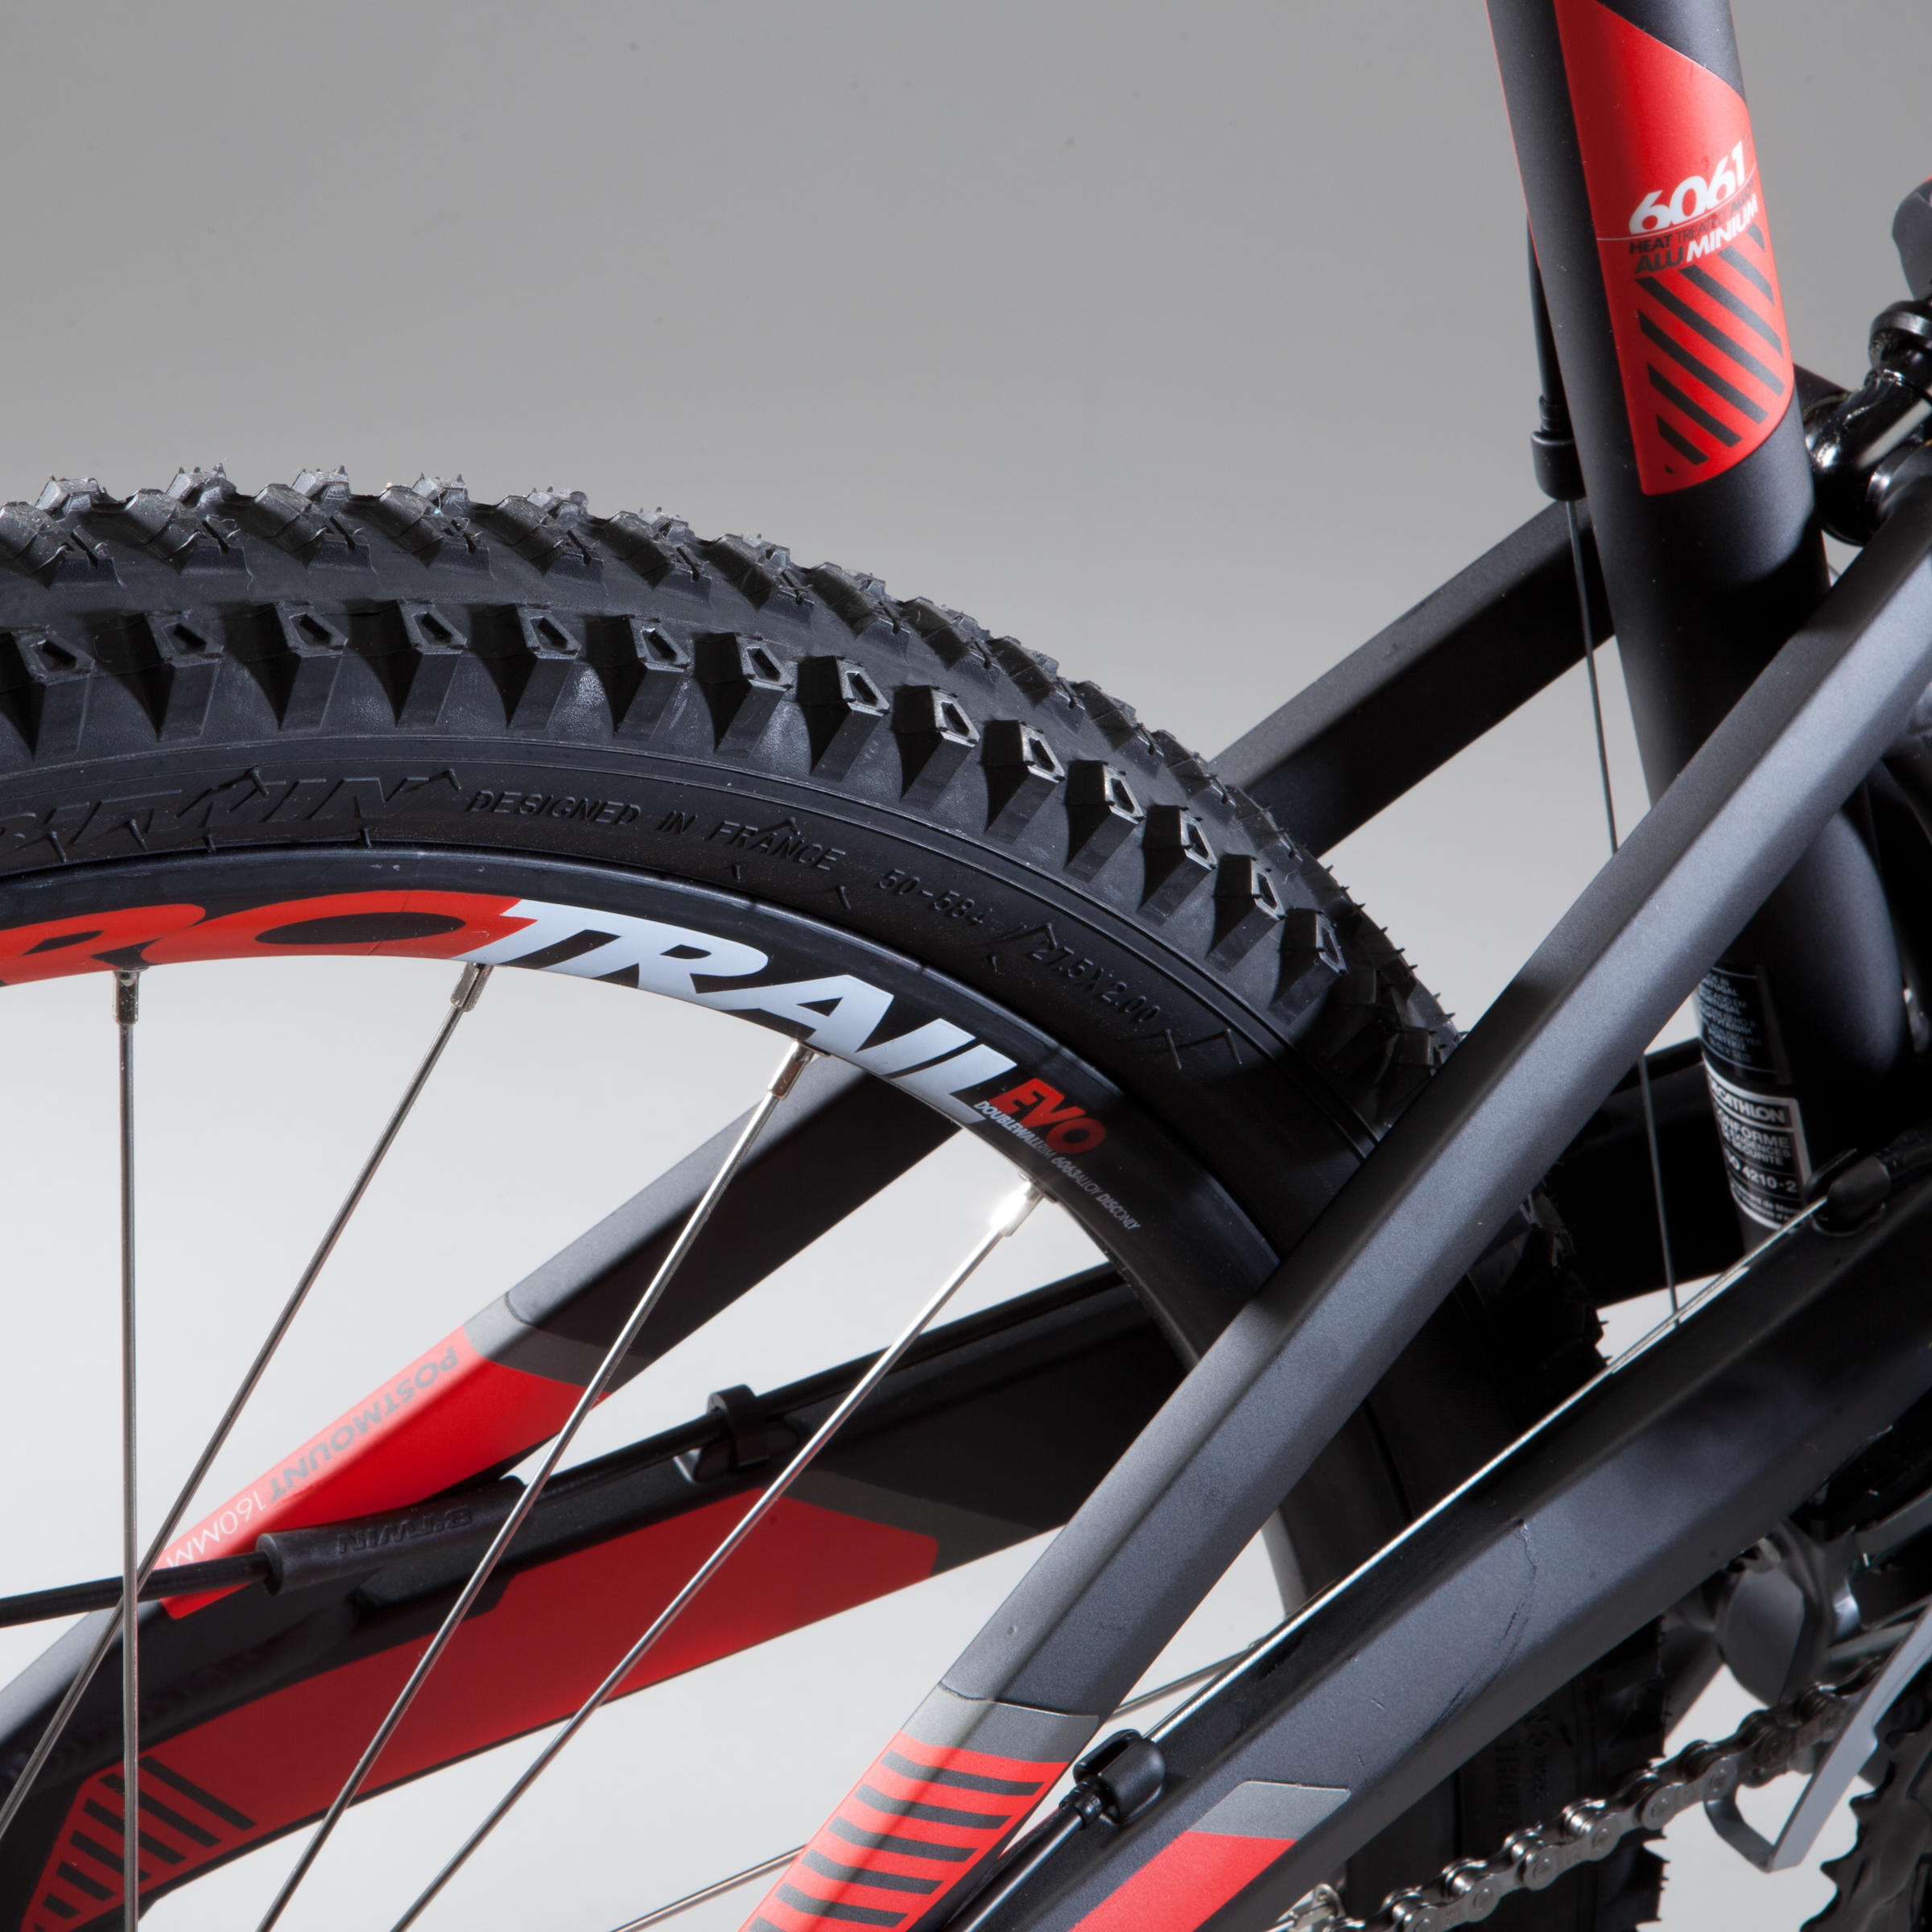 btwin rockrider 520s review